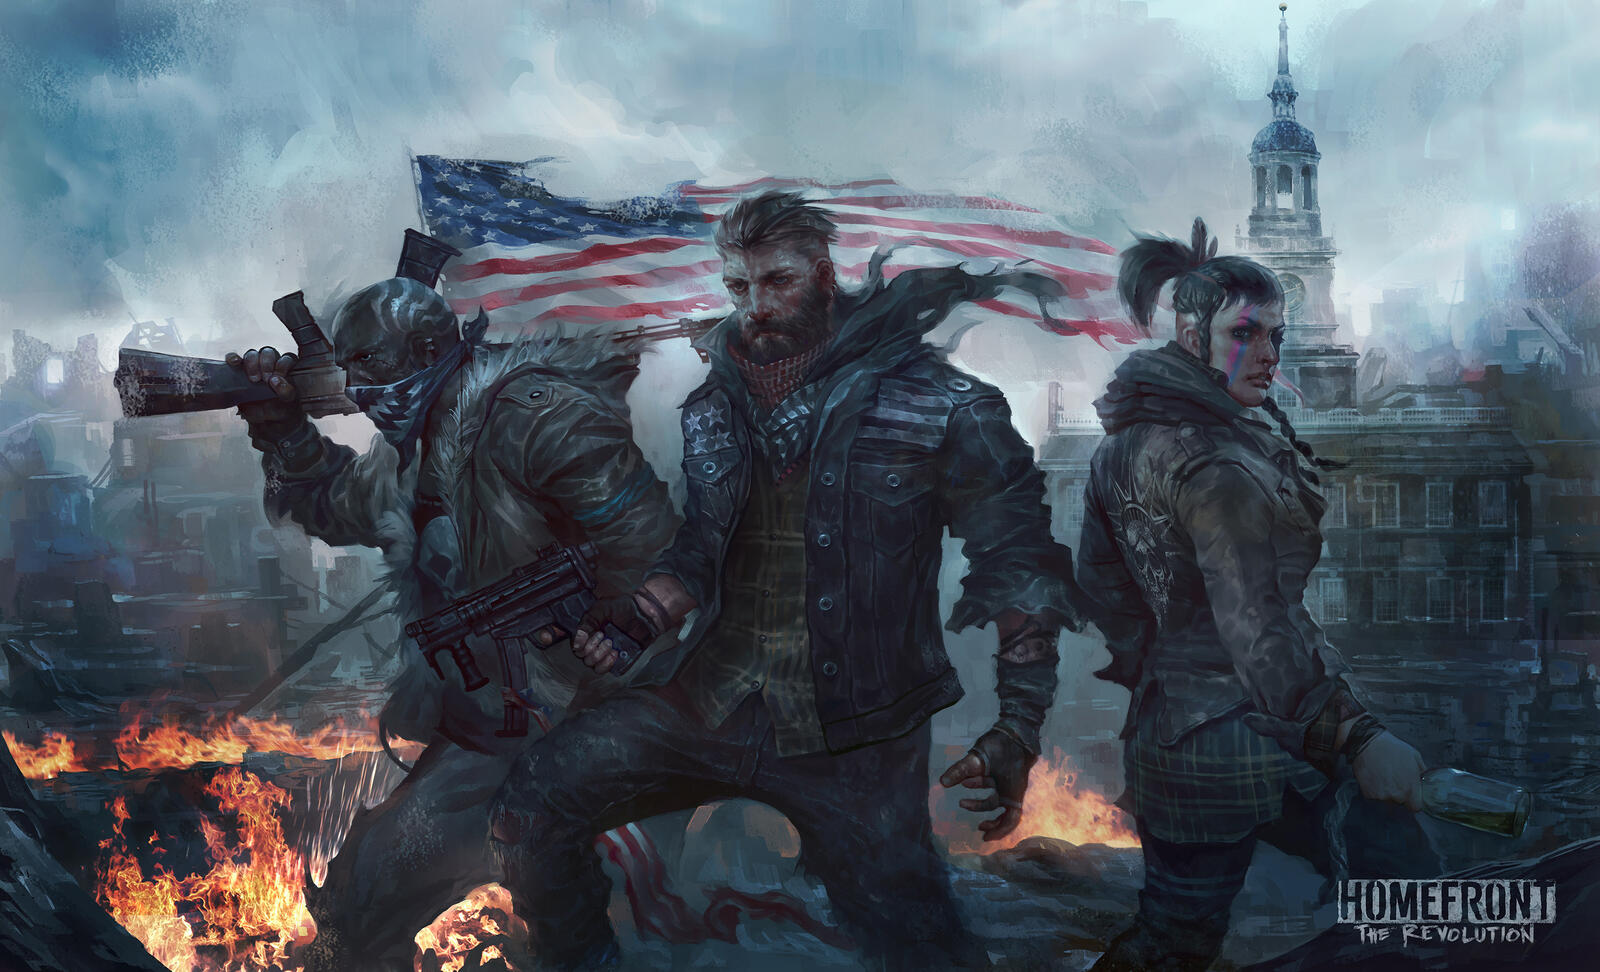 Wallpapers homefront the revolution ps games Xbox games on the desktop